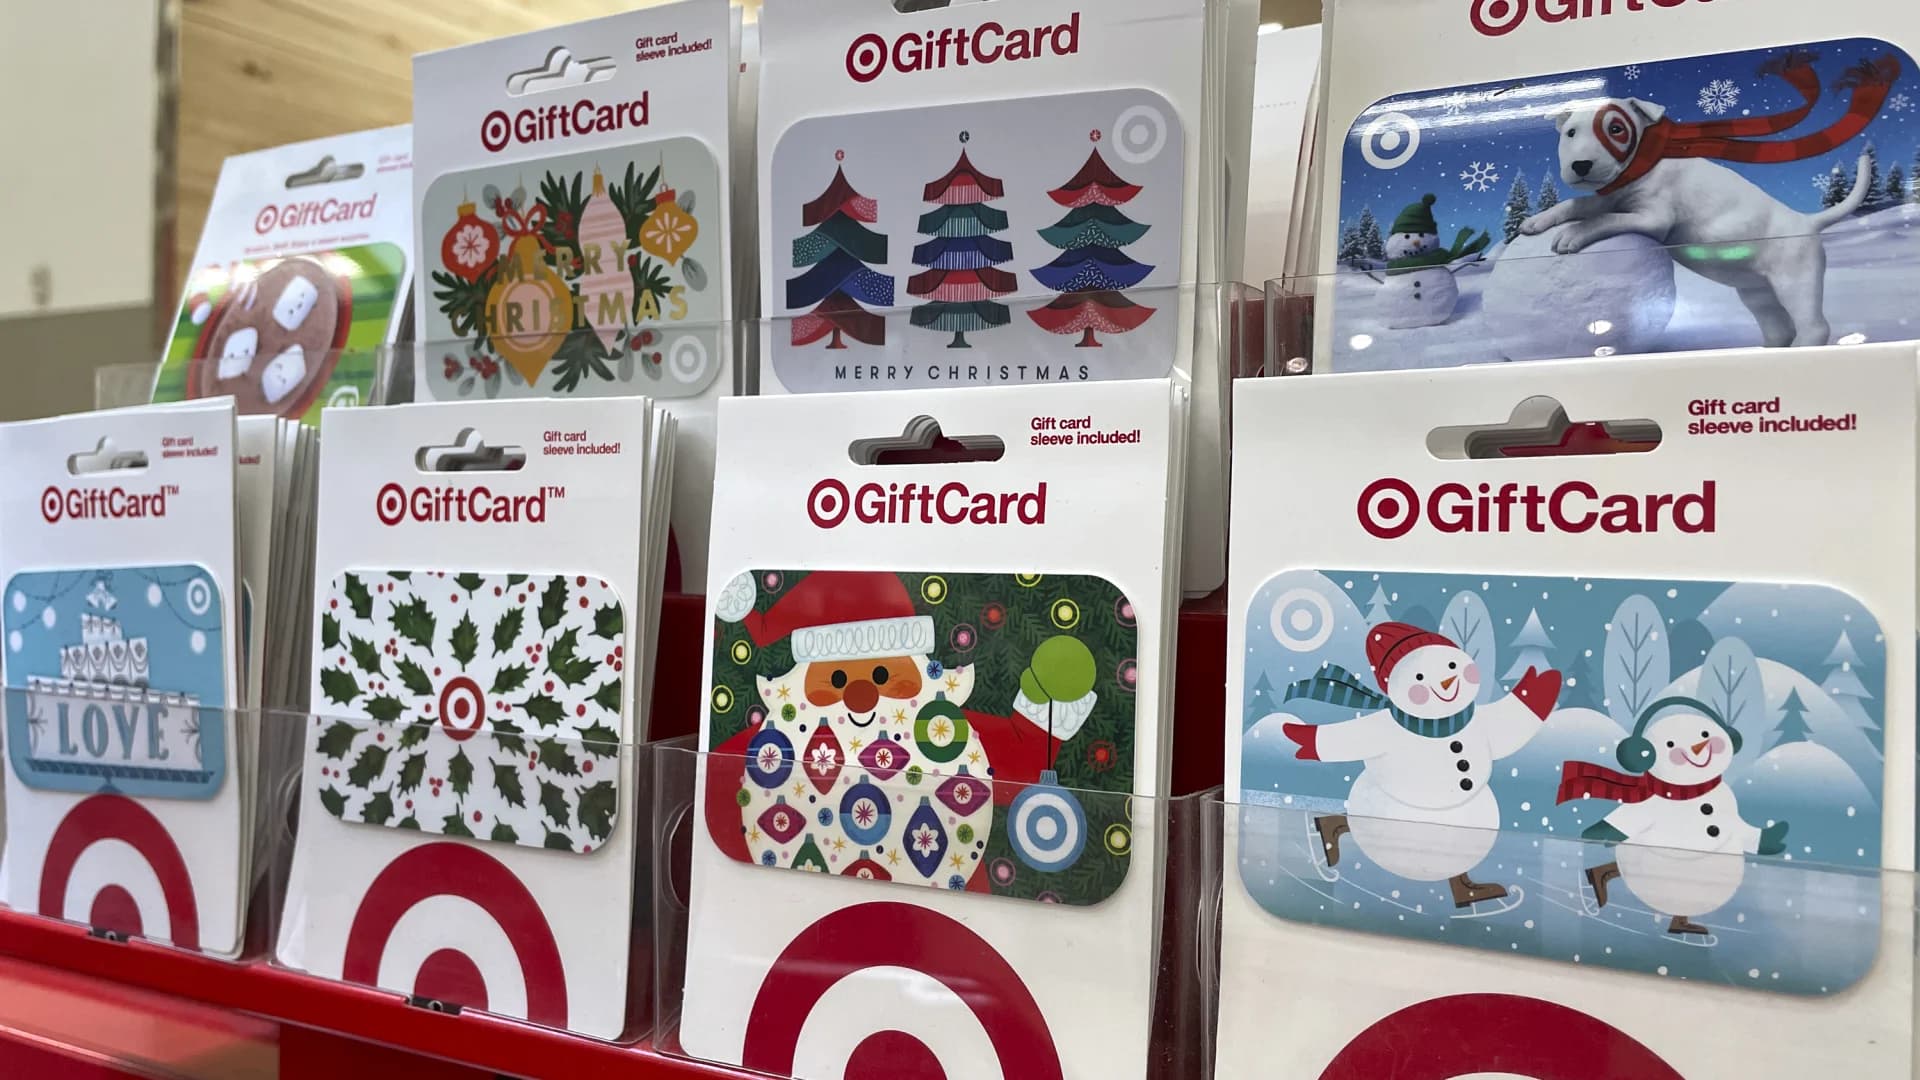 Liz Weston: This year, resolve to leave no gift card unused